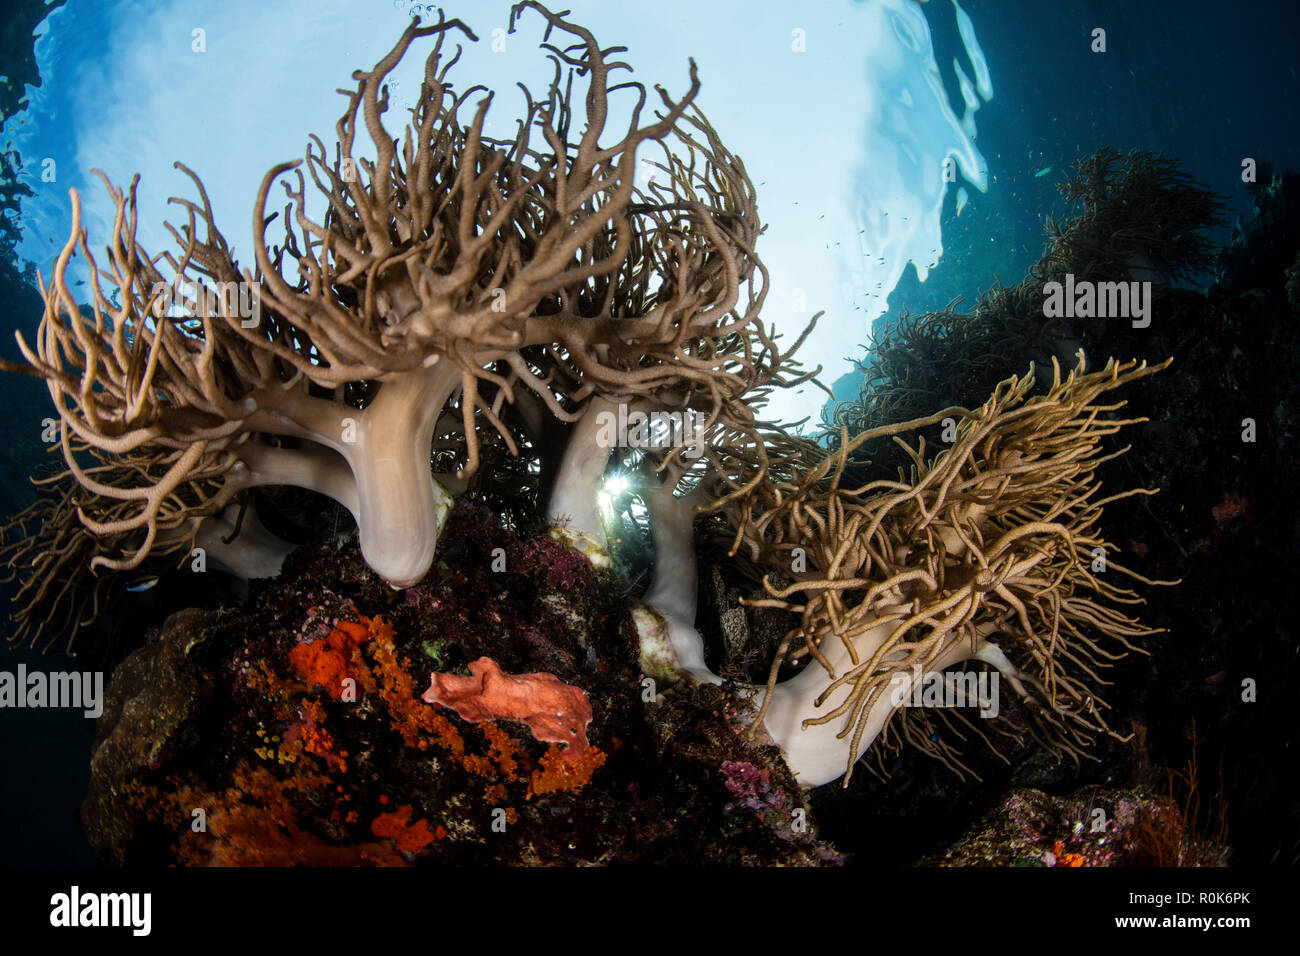 Soft corals grow on the edge of a beautiful reef in the Banda Islands of eastern Indonesia. Stock Photo